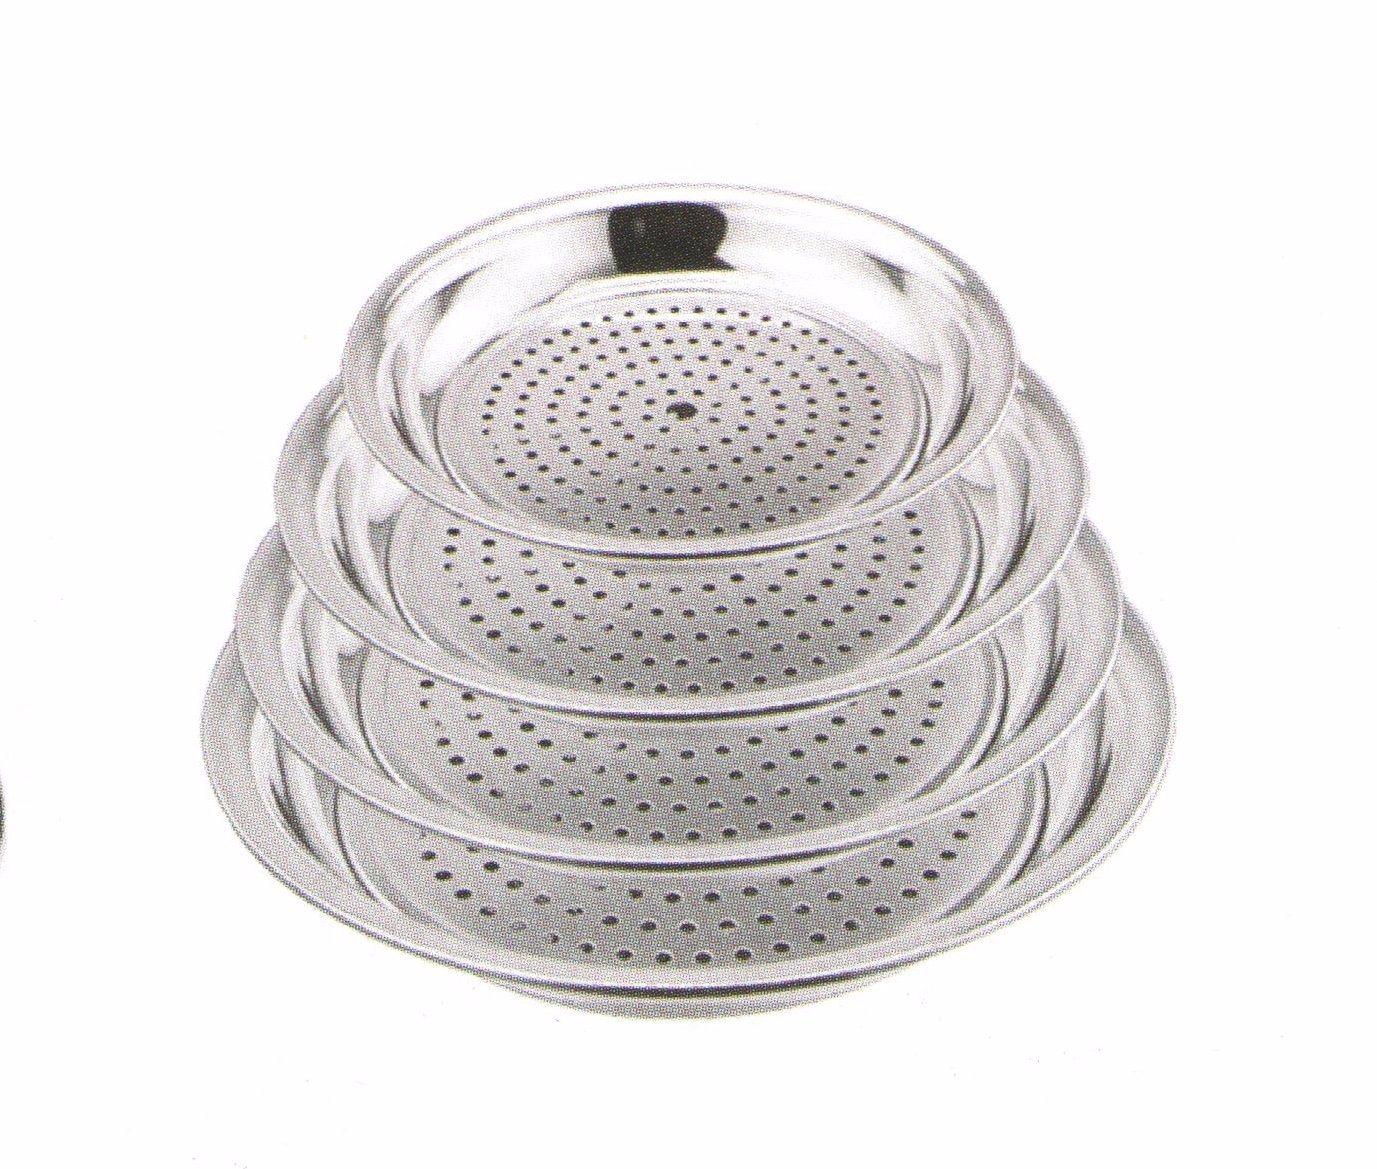 Stainless Steel Kitchenware Oval Tray in Round Design Service Tray for Steamed Dumpling Sp010